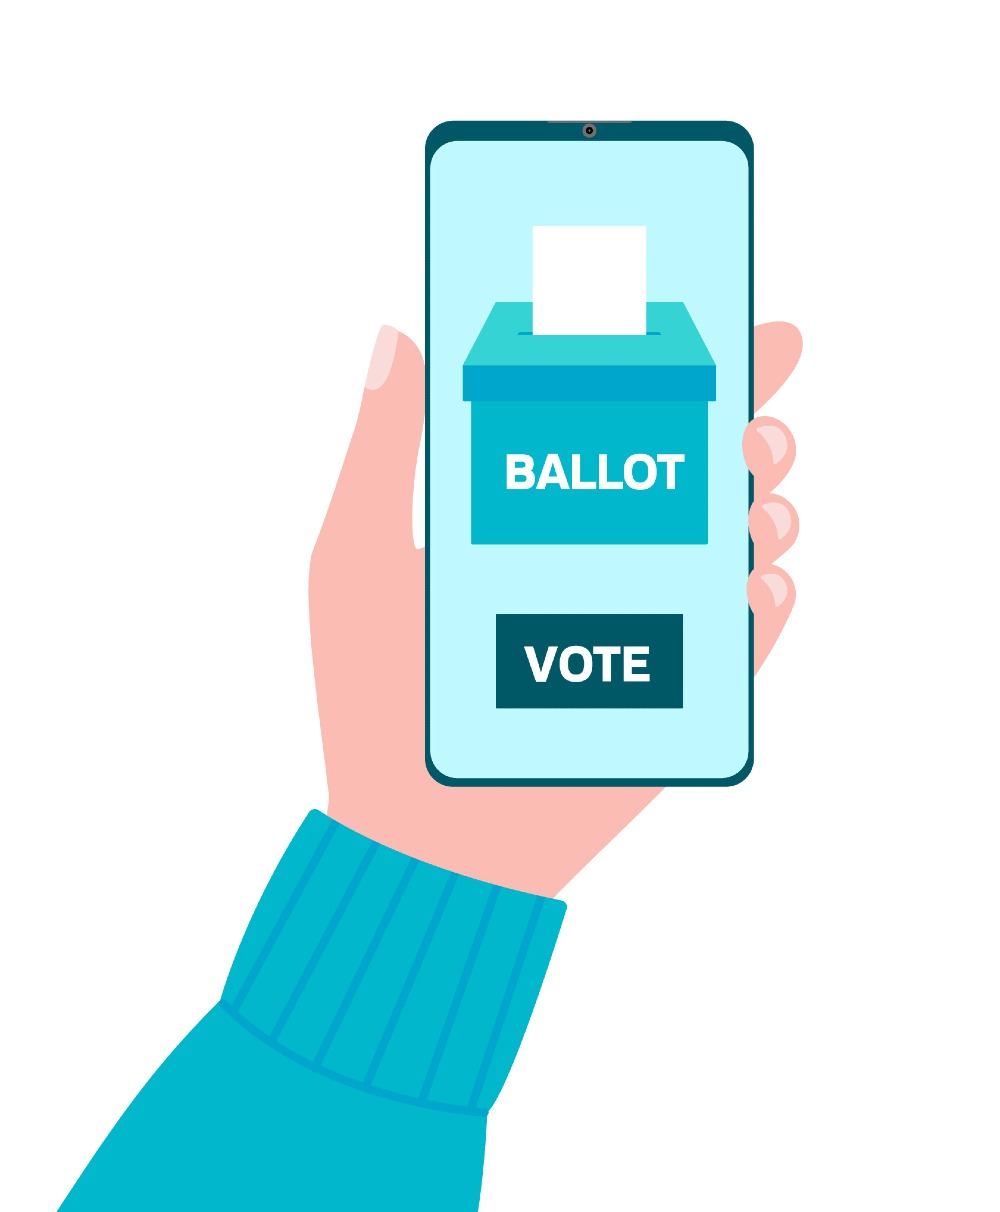 Members who work in the civil and public service, or non-commercial State agencies, still have the chance to vote after the ballot deadline was extended to noon on Monday 22nd February.